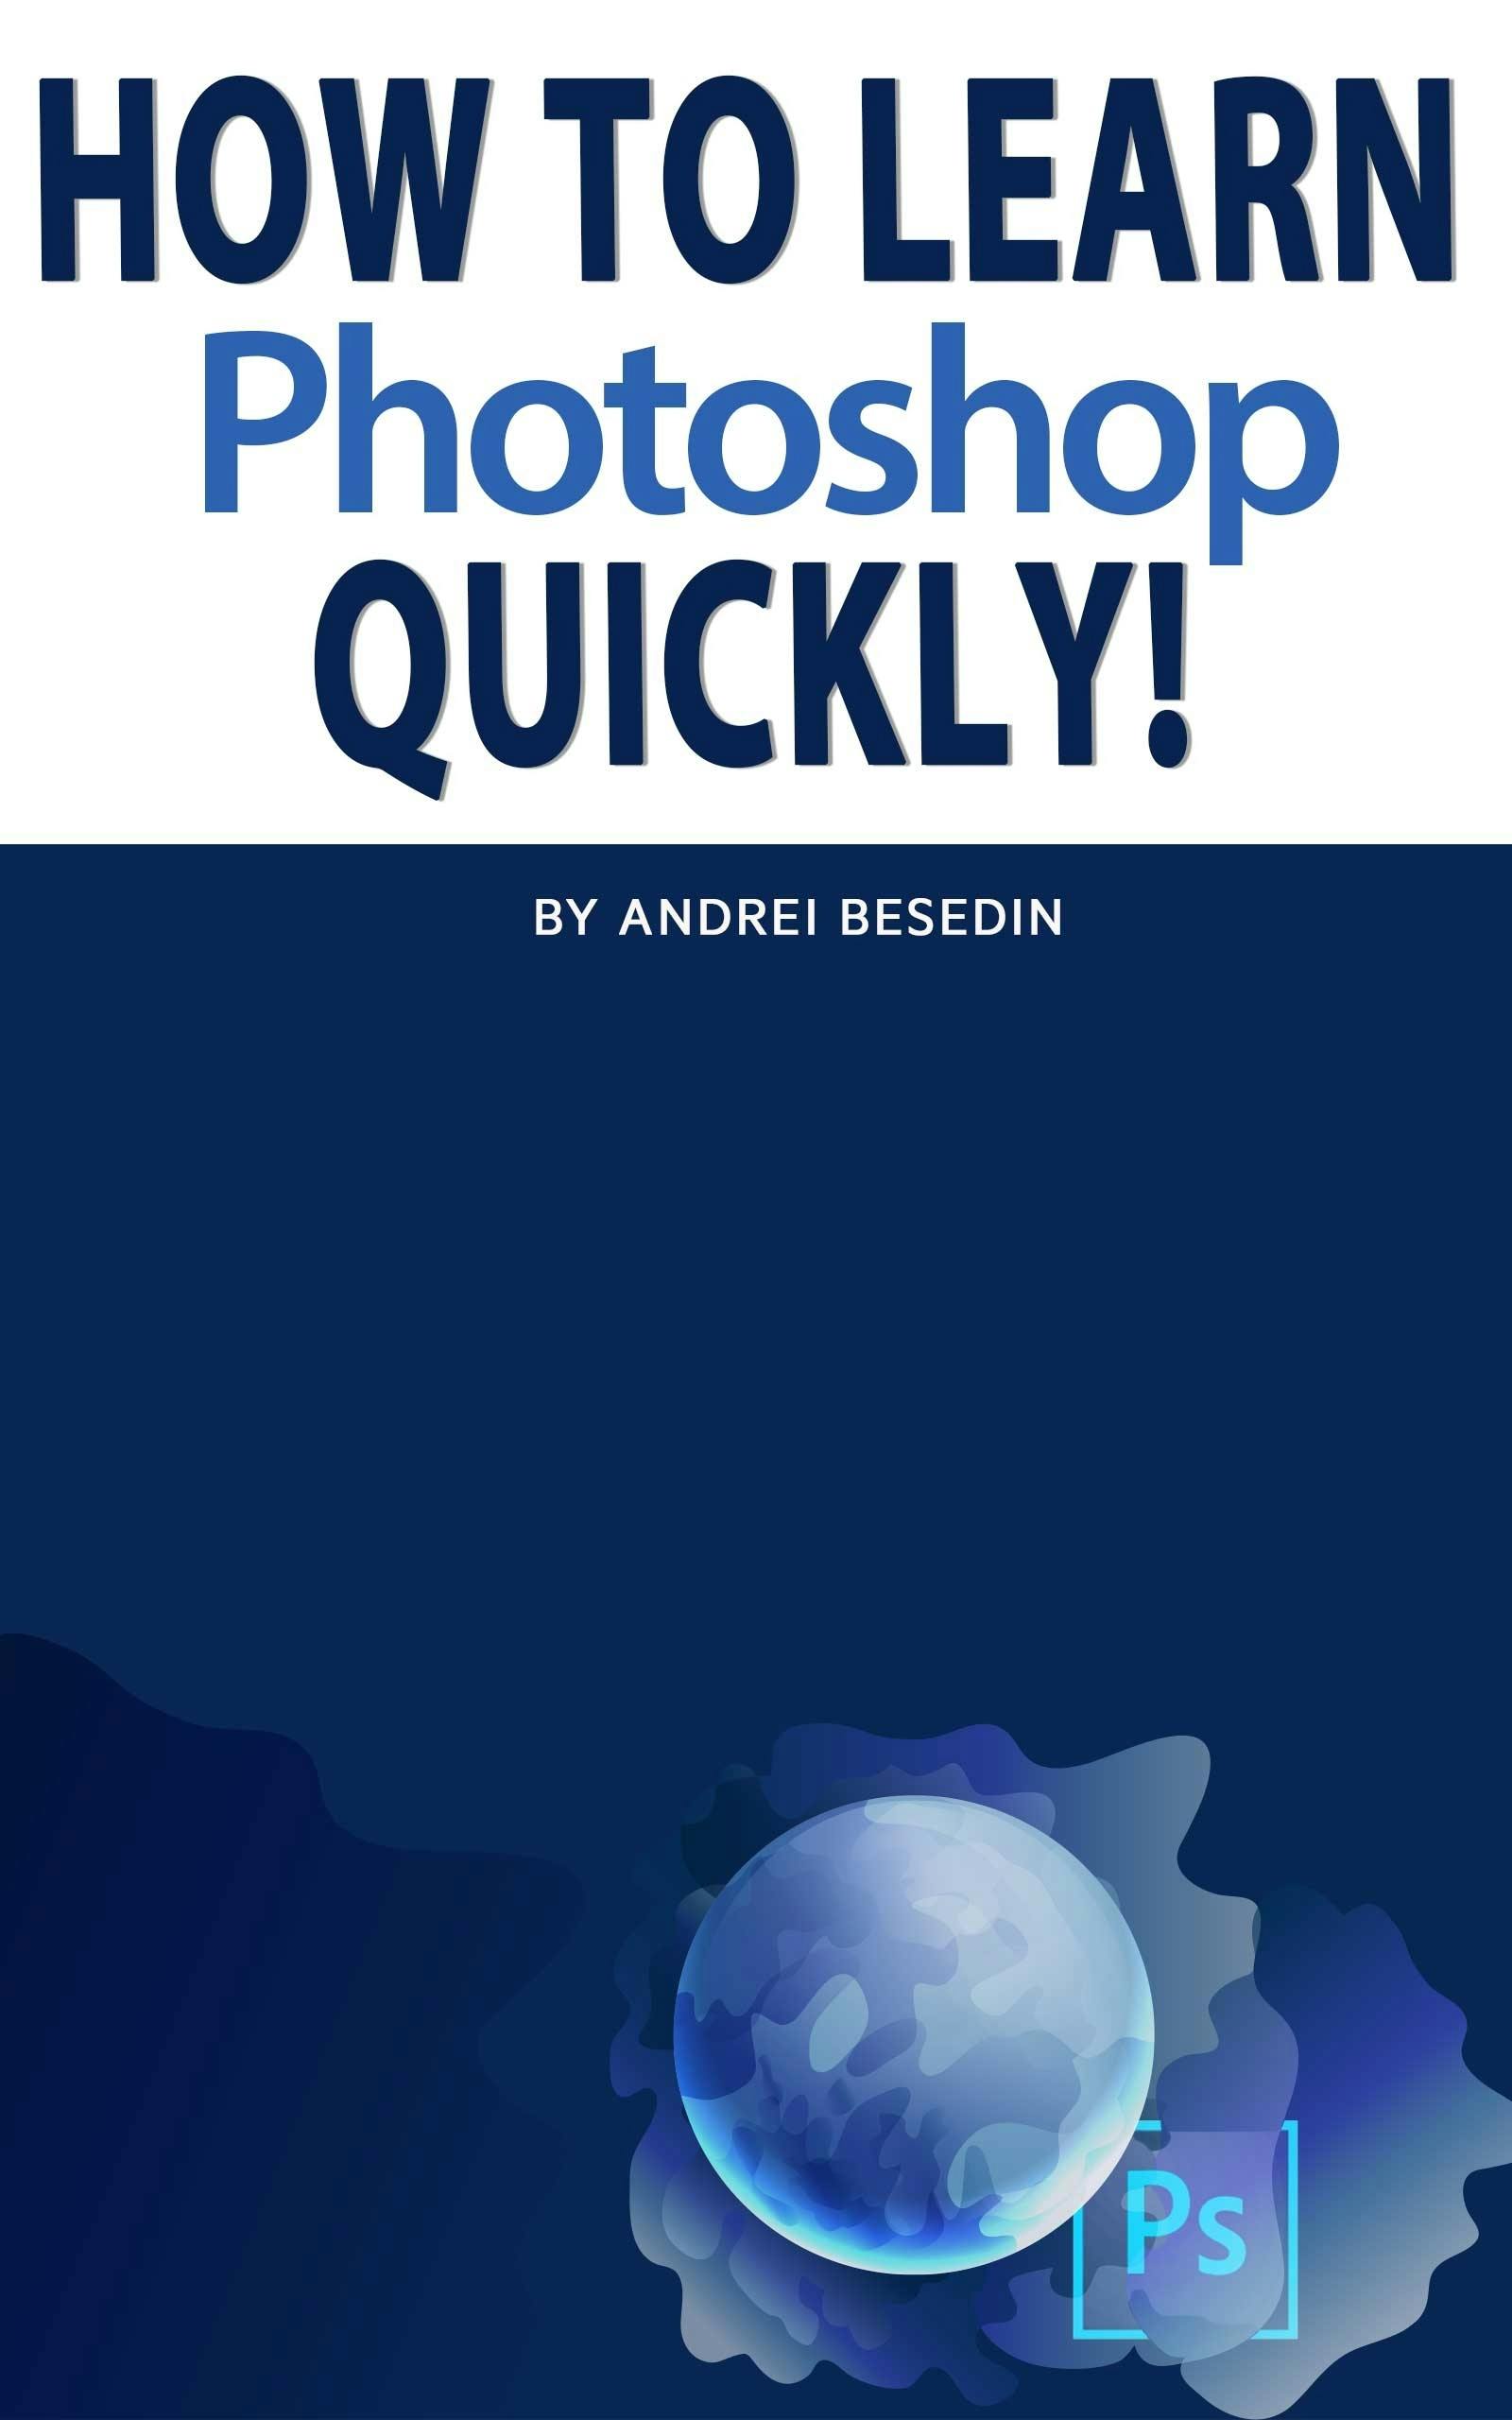 How To Learn Photoshop Quickly! - Andrei Besedin